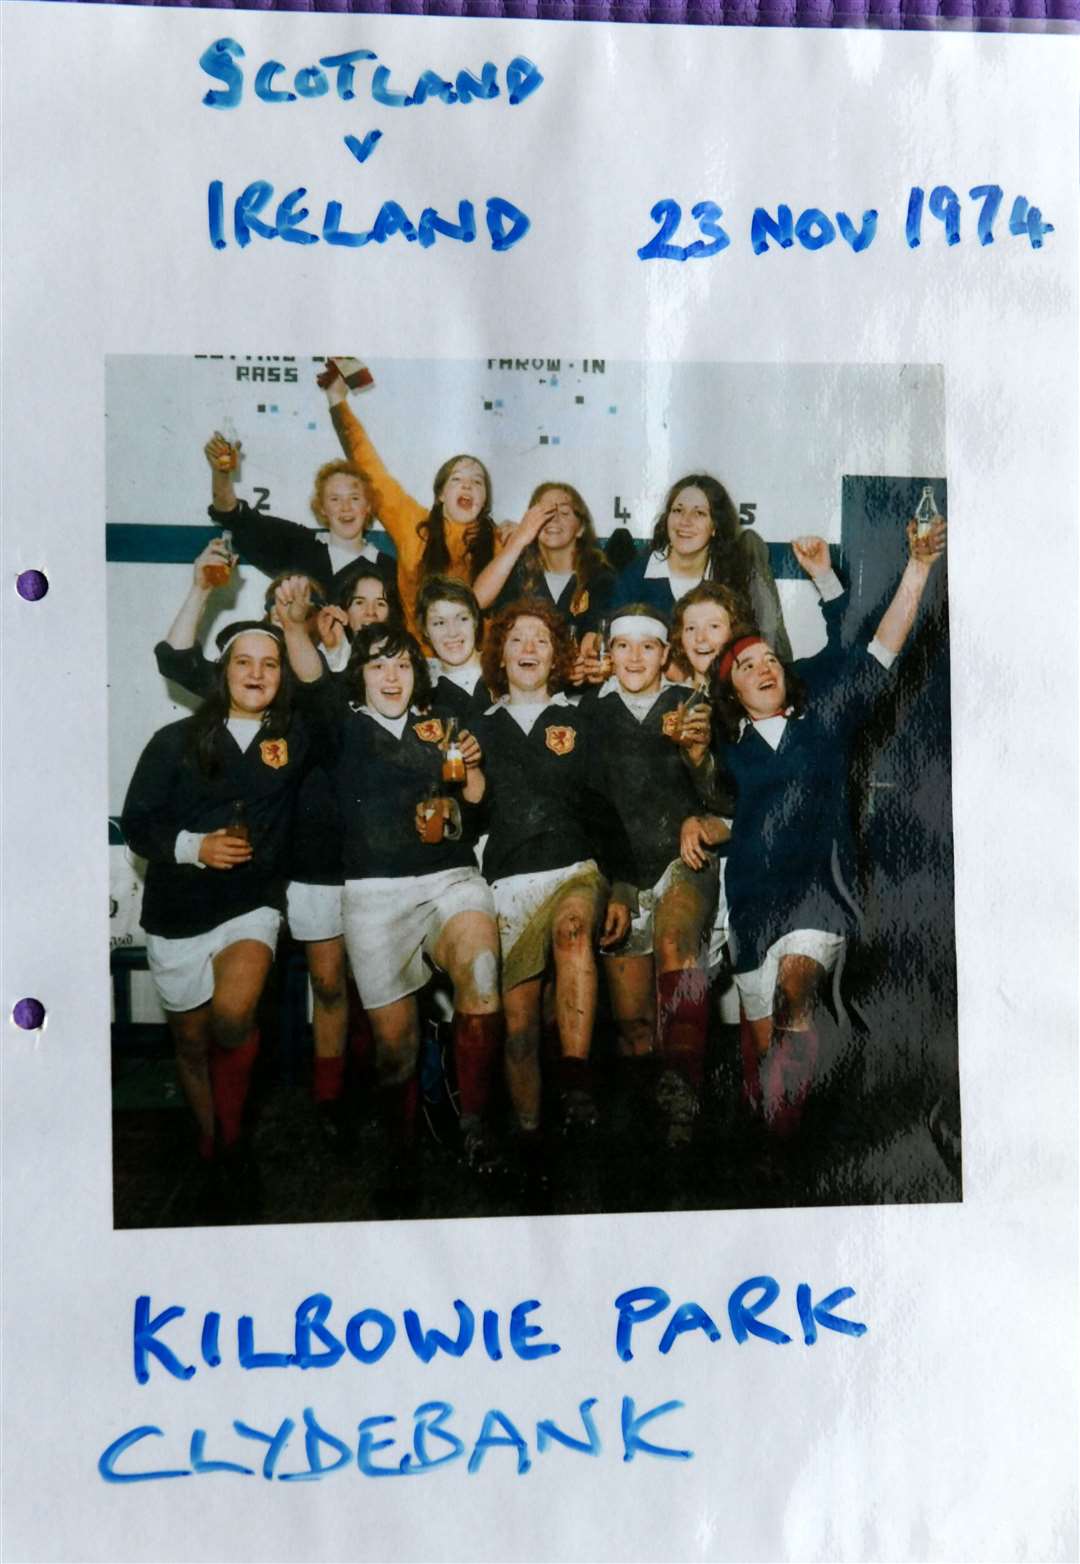 A scrapbook version of the pic of Scotland's victorious team of November 23, 1974